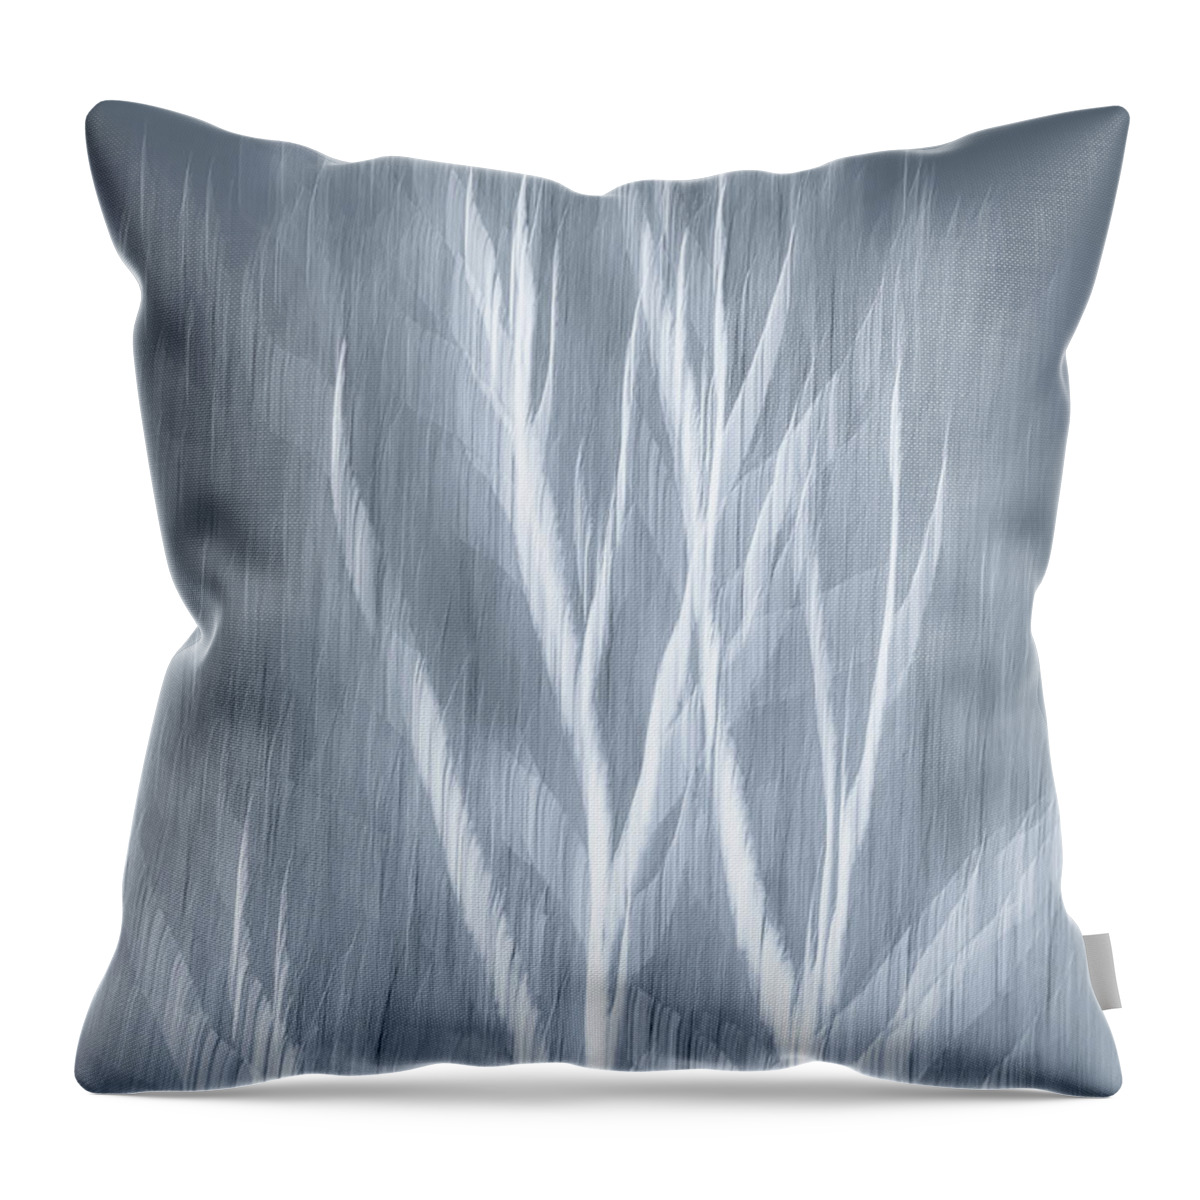 Birch Throw Pillow featuring the photograph Birch abstract by Brad Bellisle